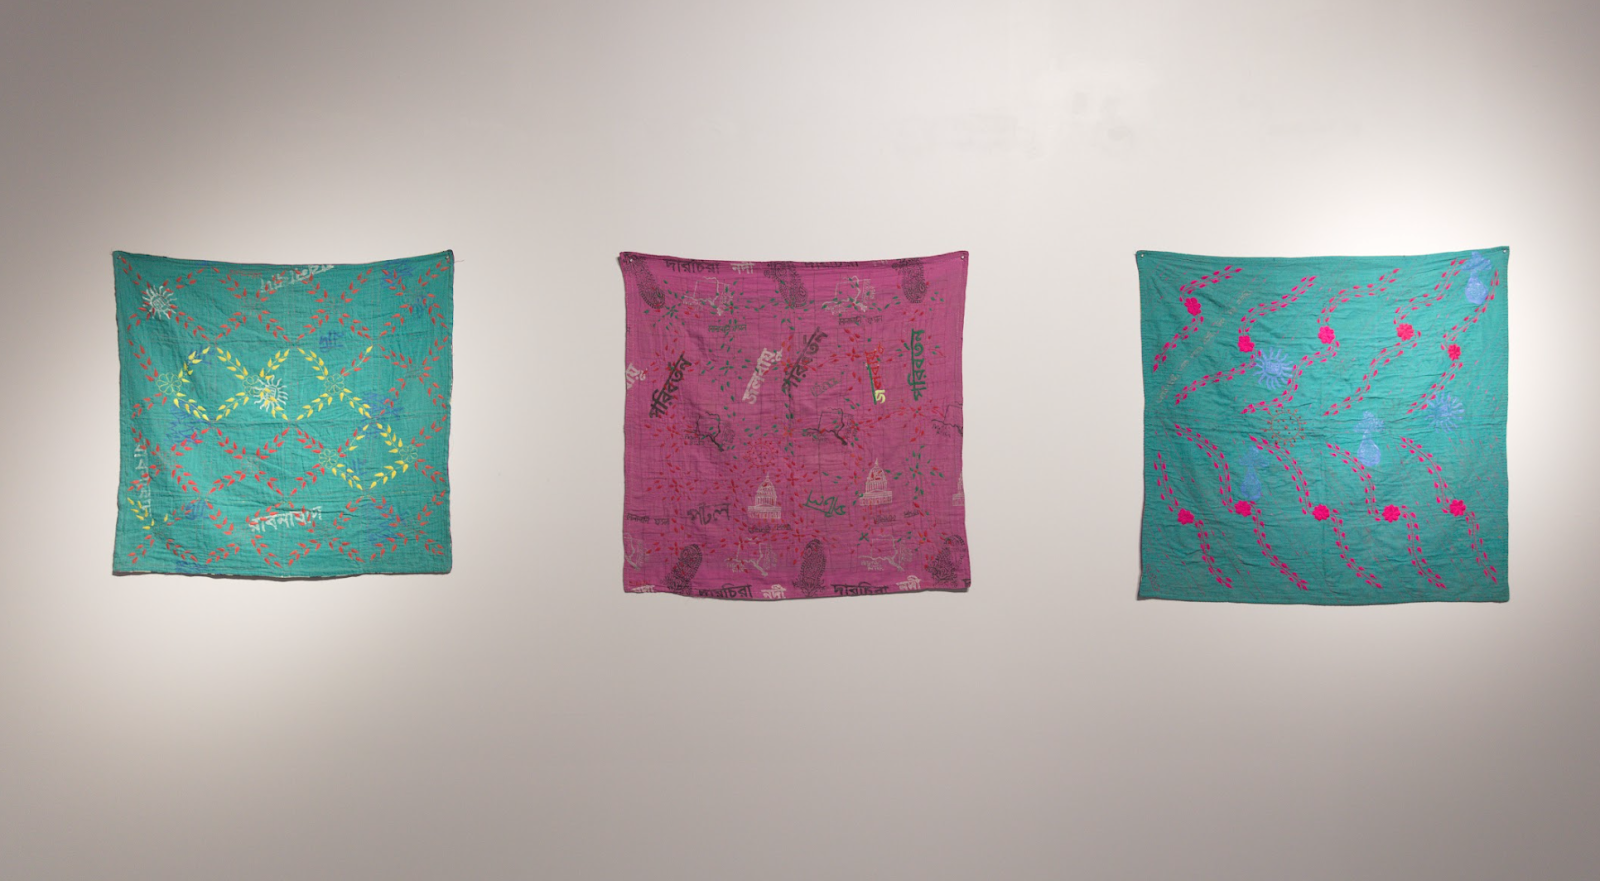 Image: Installation view, from left to right: Verdant Kantha (2021), Capitol Kantha (2021), and Hot Pink Flowers on Green Fields Kantha (2021). The three square cloths—from left to right, teal, magenta, teal—hang in a row against a white wall, with printed and embroidered patterns of different colors on them. Image courtesy of the South Asia Institute.